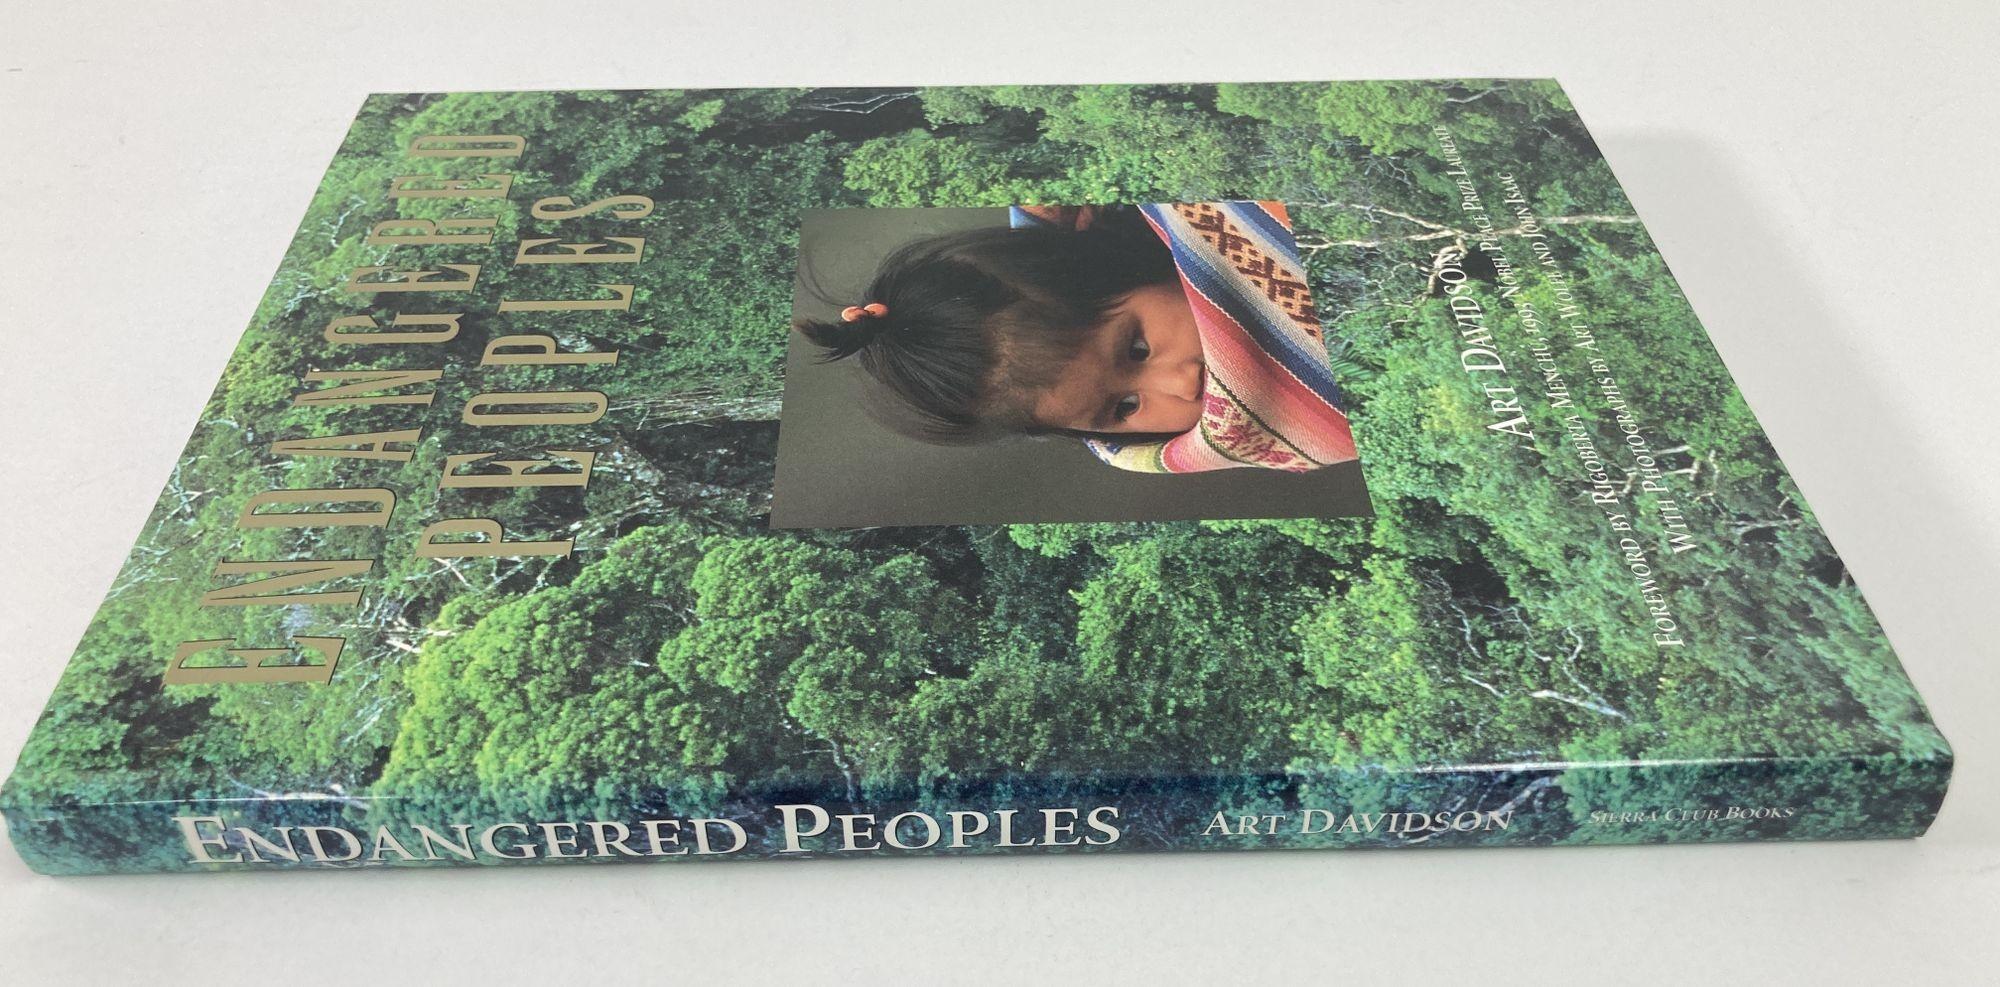 Endangered People by Art Davidson 1993

Publisher ? : ? Sierra Club; First Edition (October 26, 1993)
Language ? : ? English
Paperback ? : ? 195 pages
Item weight ? : ? 3 pounds
Dimensions ? : ? 9.5 x 0.5 x 12.5 inches

To honor the United